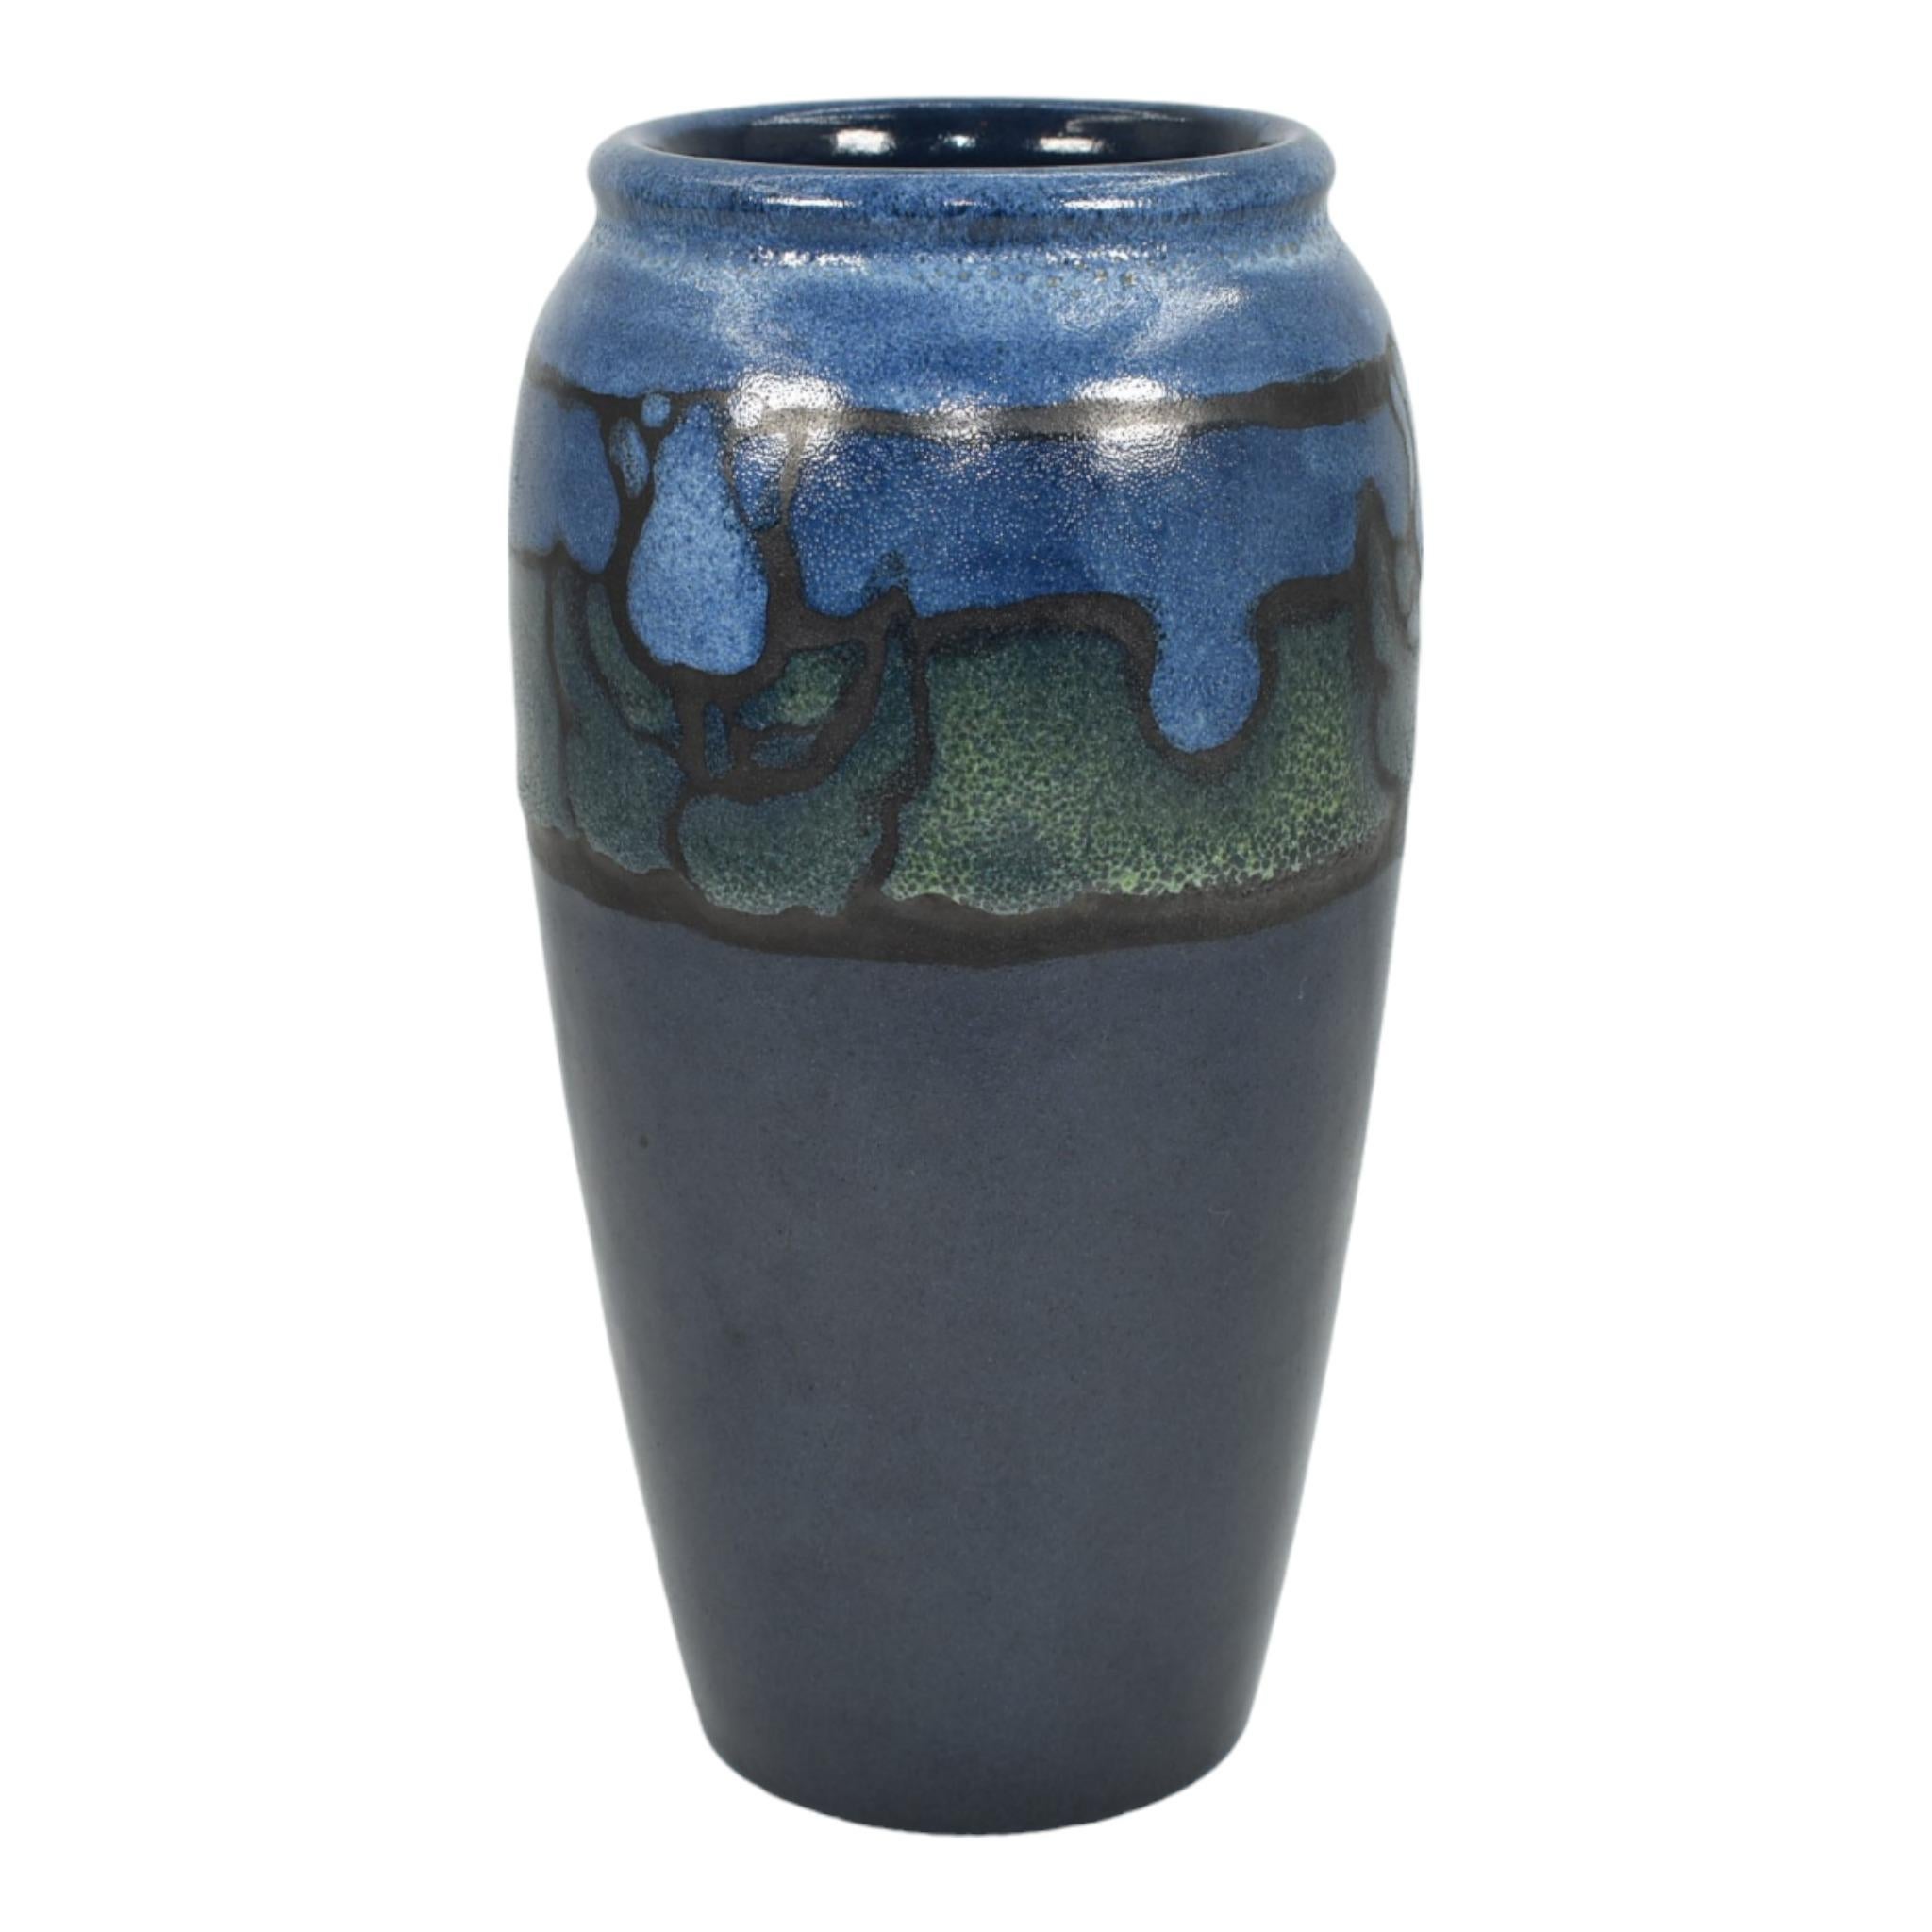 Saturday Evening Girls SEG 1925 Vintage Art Pottery Tulip Blue Ceramic Vase In Good Condition For Sale In East Peoria, IL